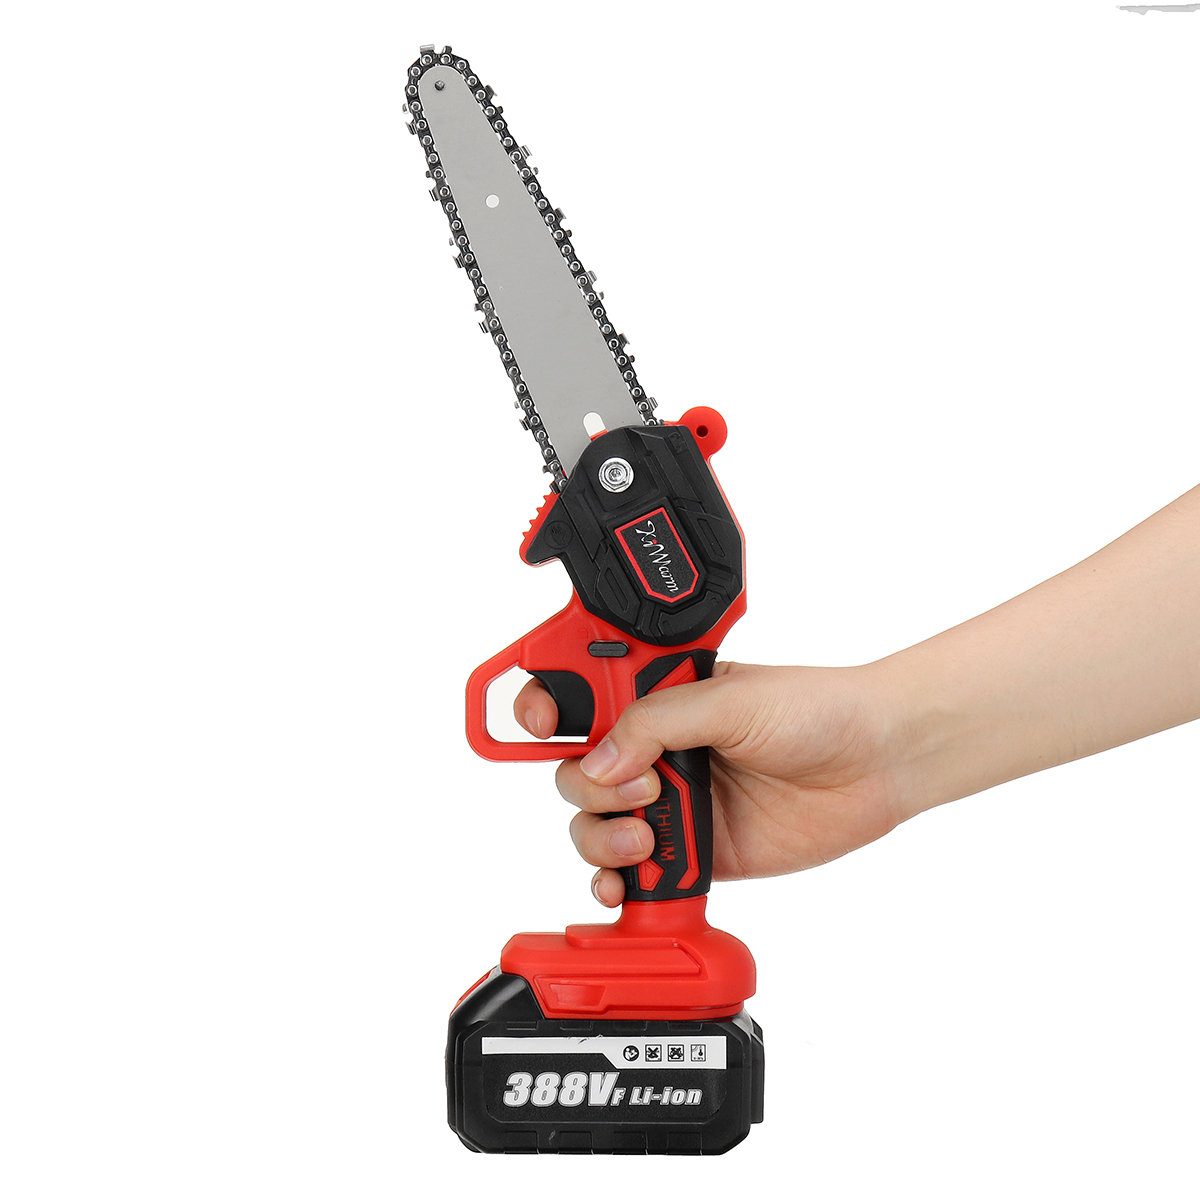 388VF-3000W-Cordless-Brushless-6Inch-Electric-Chain-Saw-Chainsaw-Firewood-Cutting-with-Battery-1954233-8